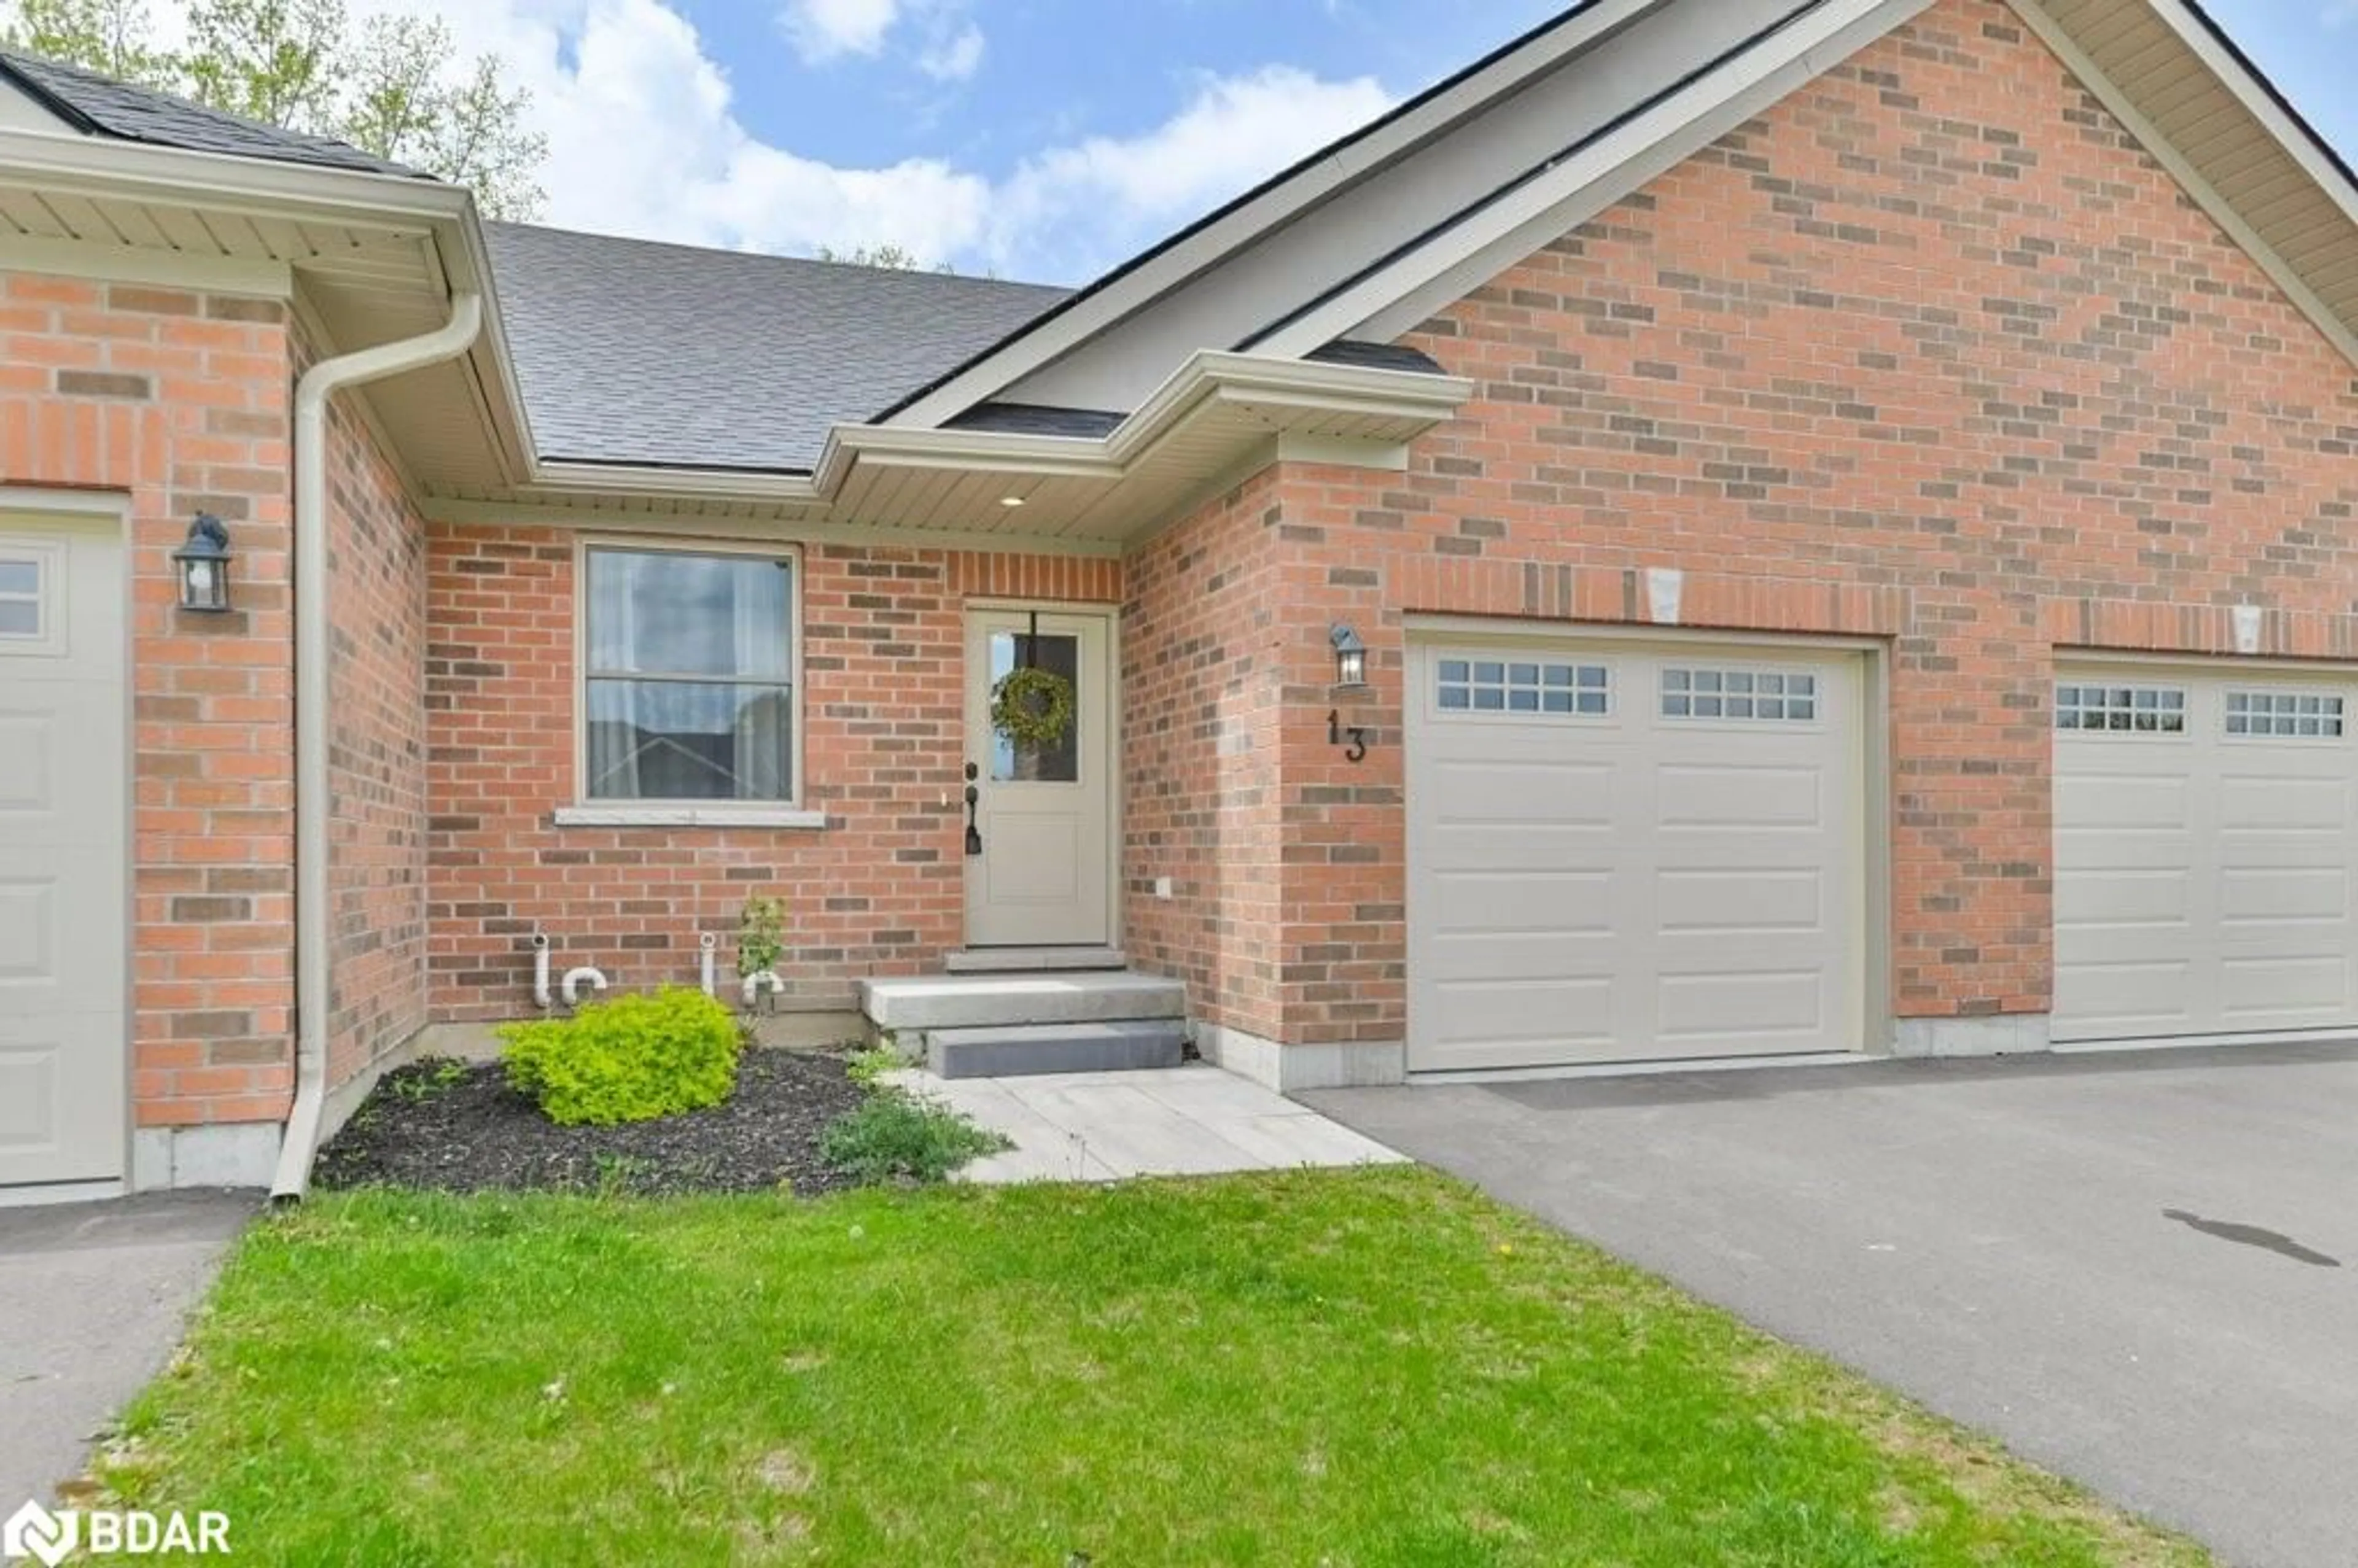 Home with brick exterior material for 13 Carrick St, Stirling Ontario K0K 3E0